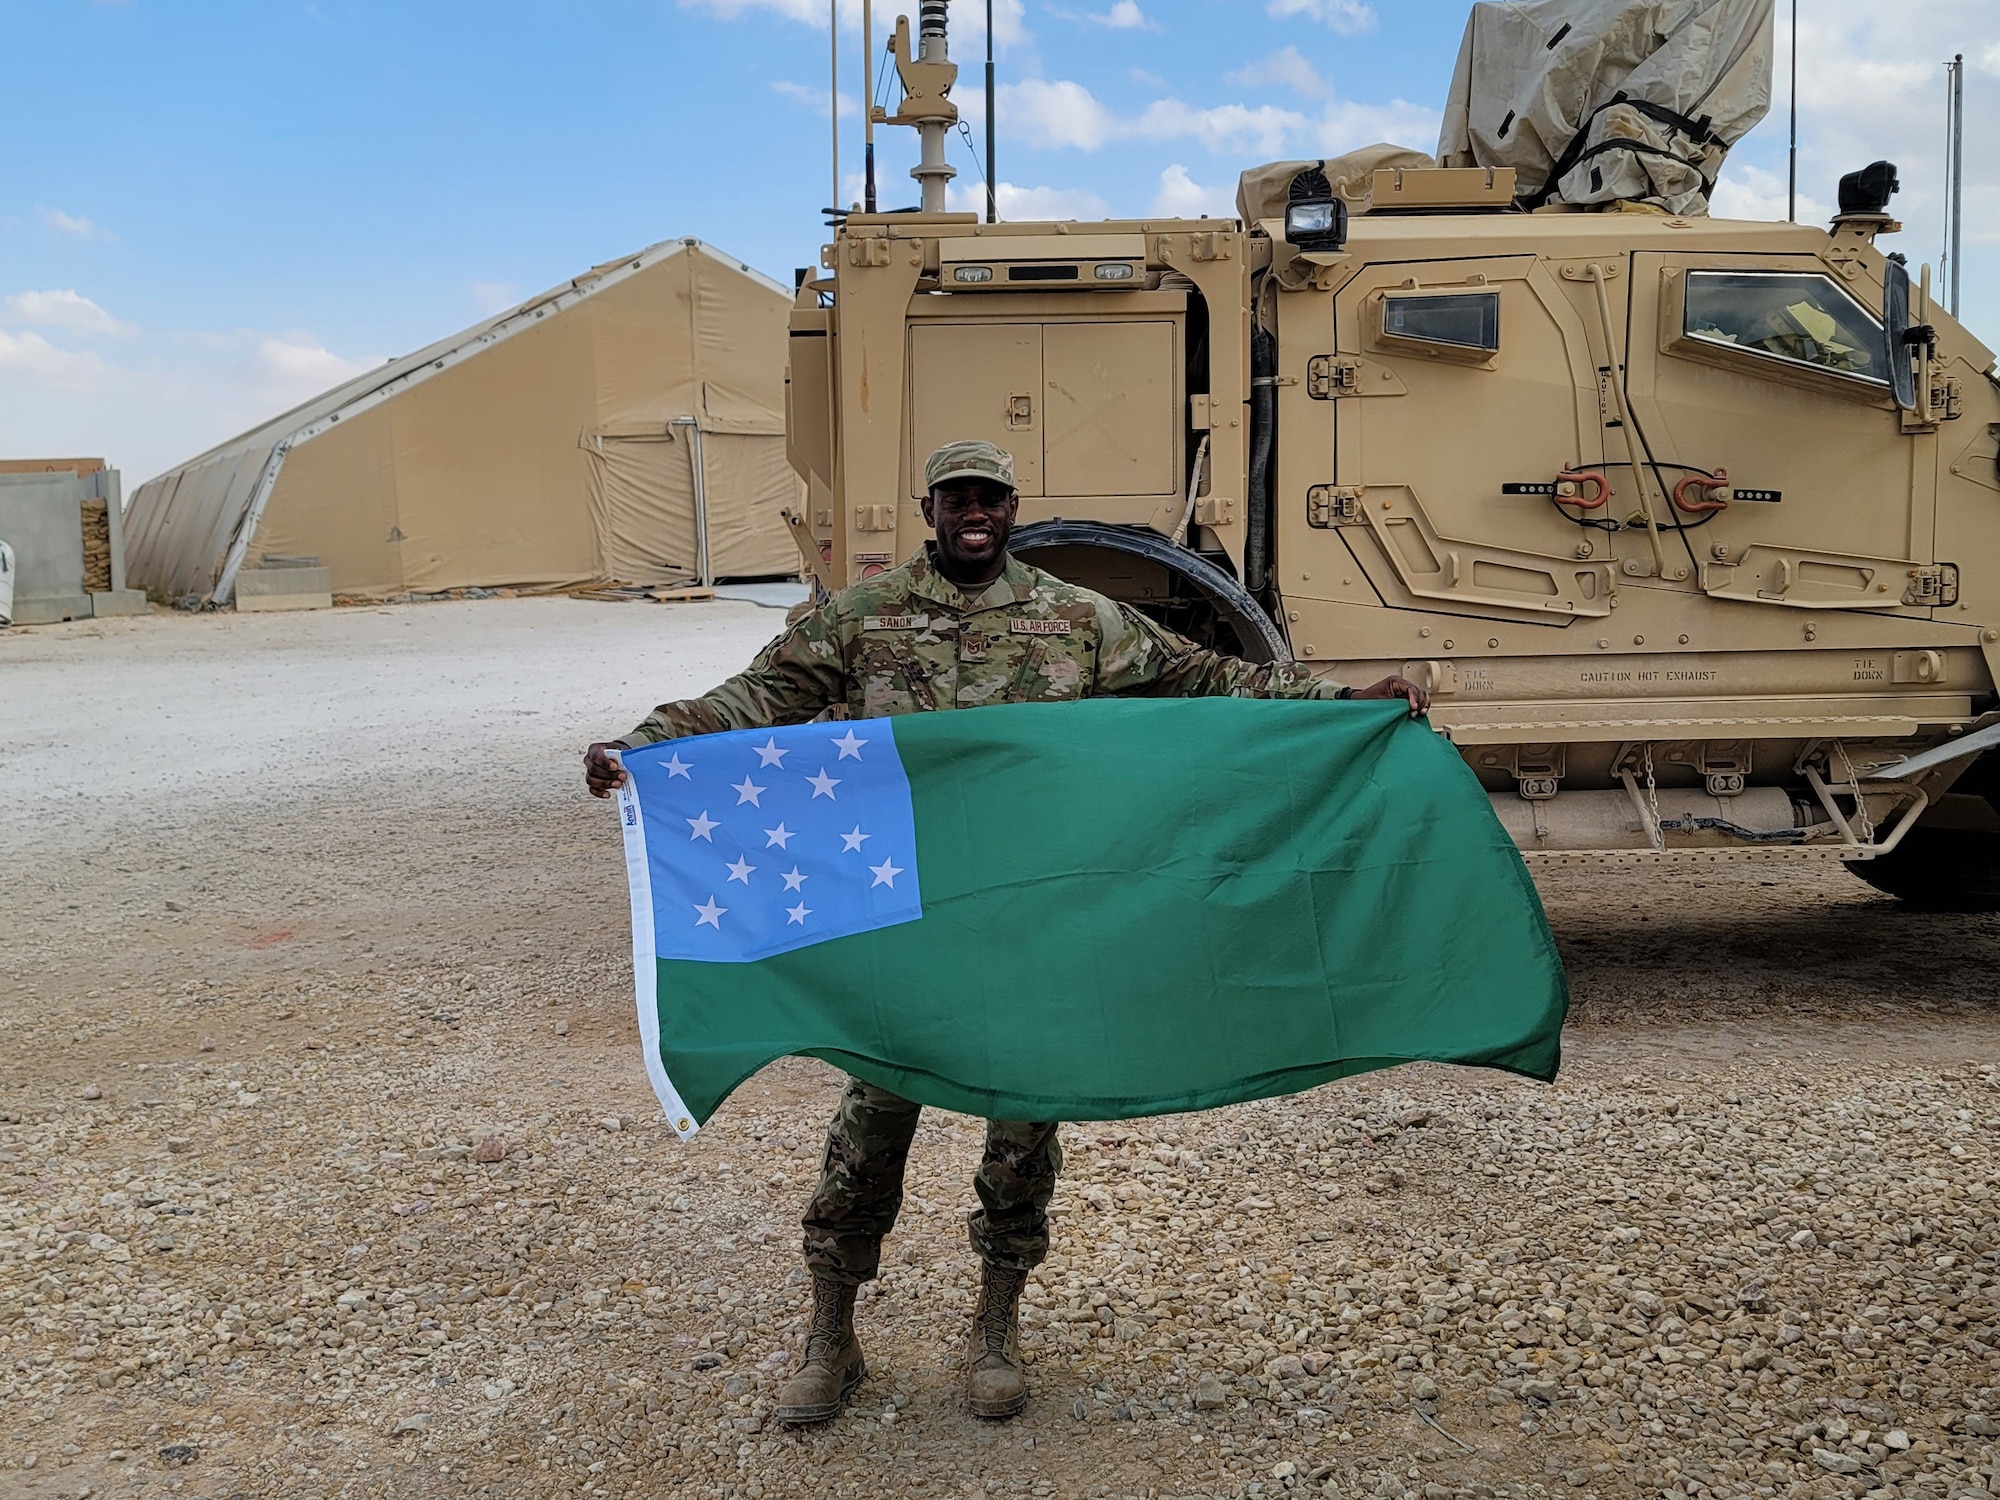 U.S. Air Force Tech. Sgt. Gladimir Sanon, 158th Civil Engineer Squadron readiness NCOIC, Vermont Air National Guard, holds the Green Mountain Boy battle flag at an air base in Southwest Asia, April 2, 2021